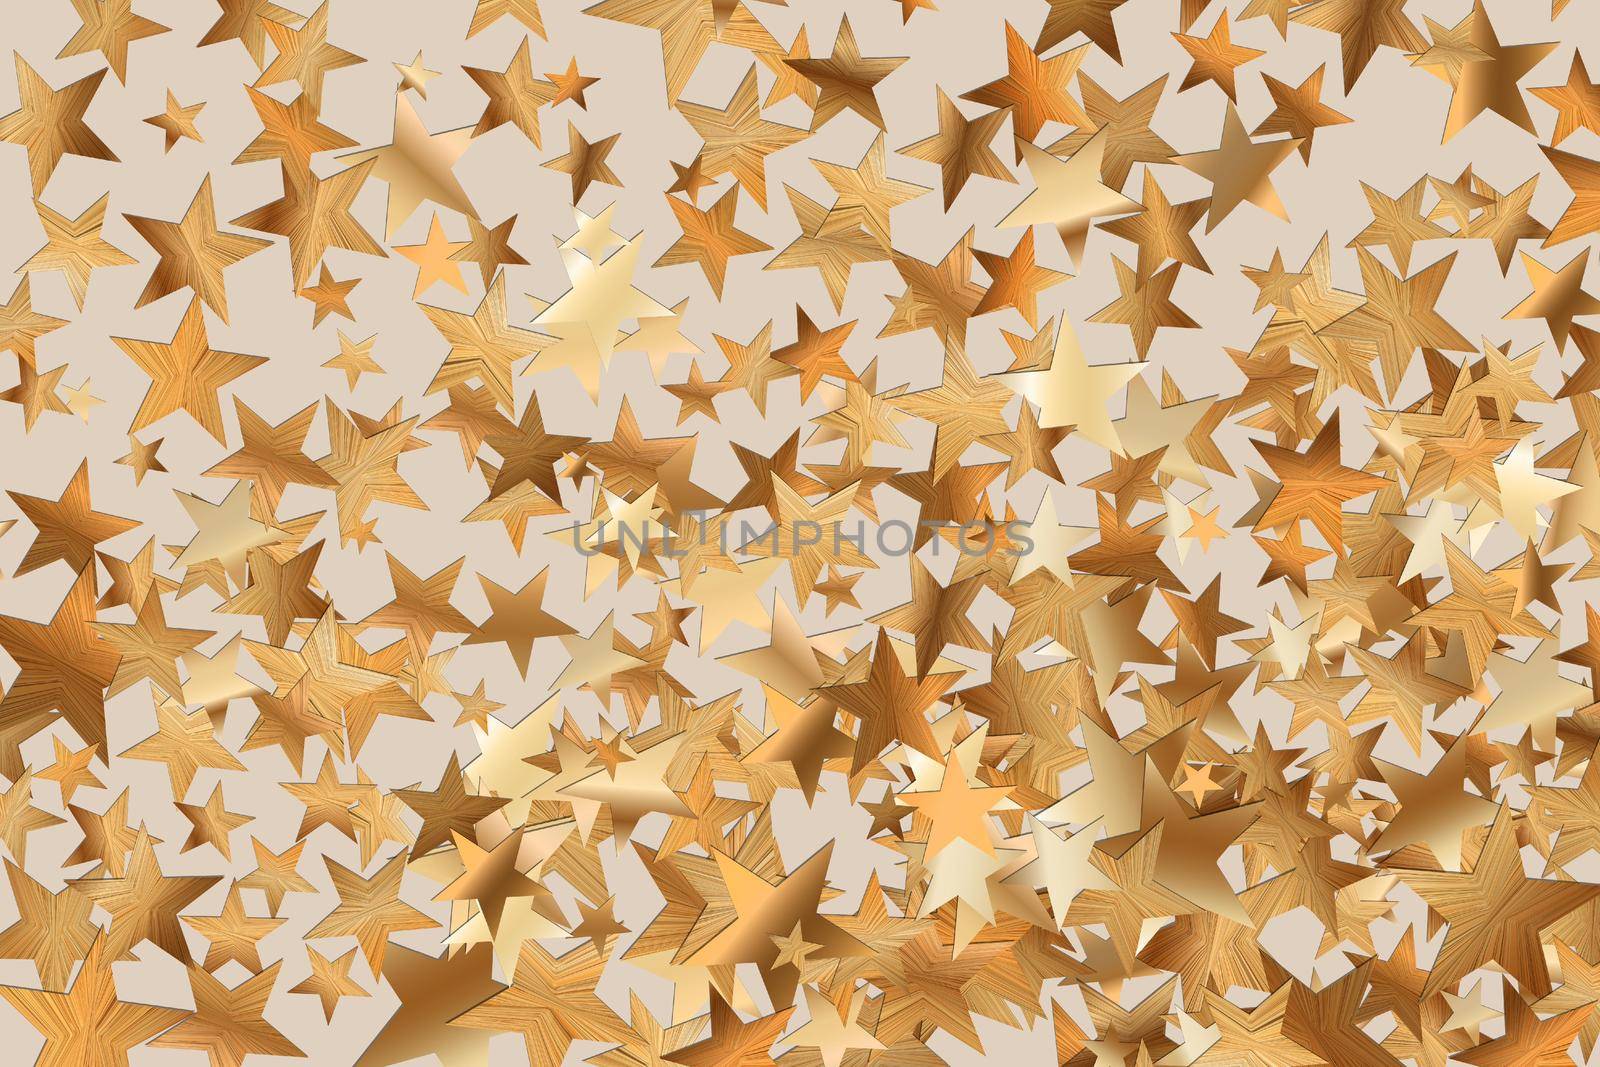 Stars golden glitter confetti isolated on blurred abstract beige background. Festive holiday background. Celebration concept. Falling magic gold particles. Invitation mock up. Top view, flat lay.